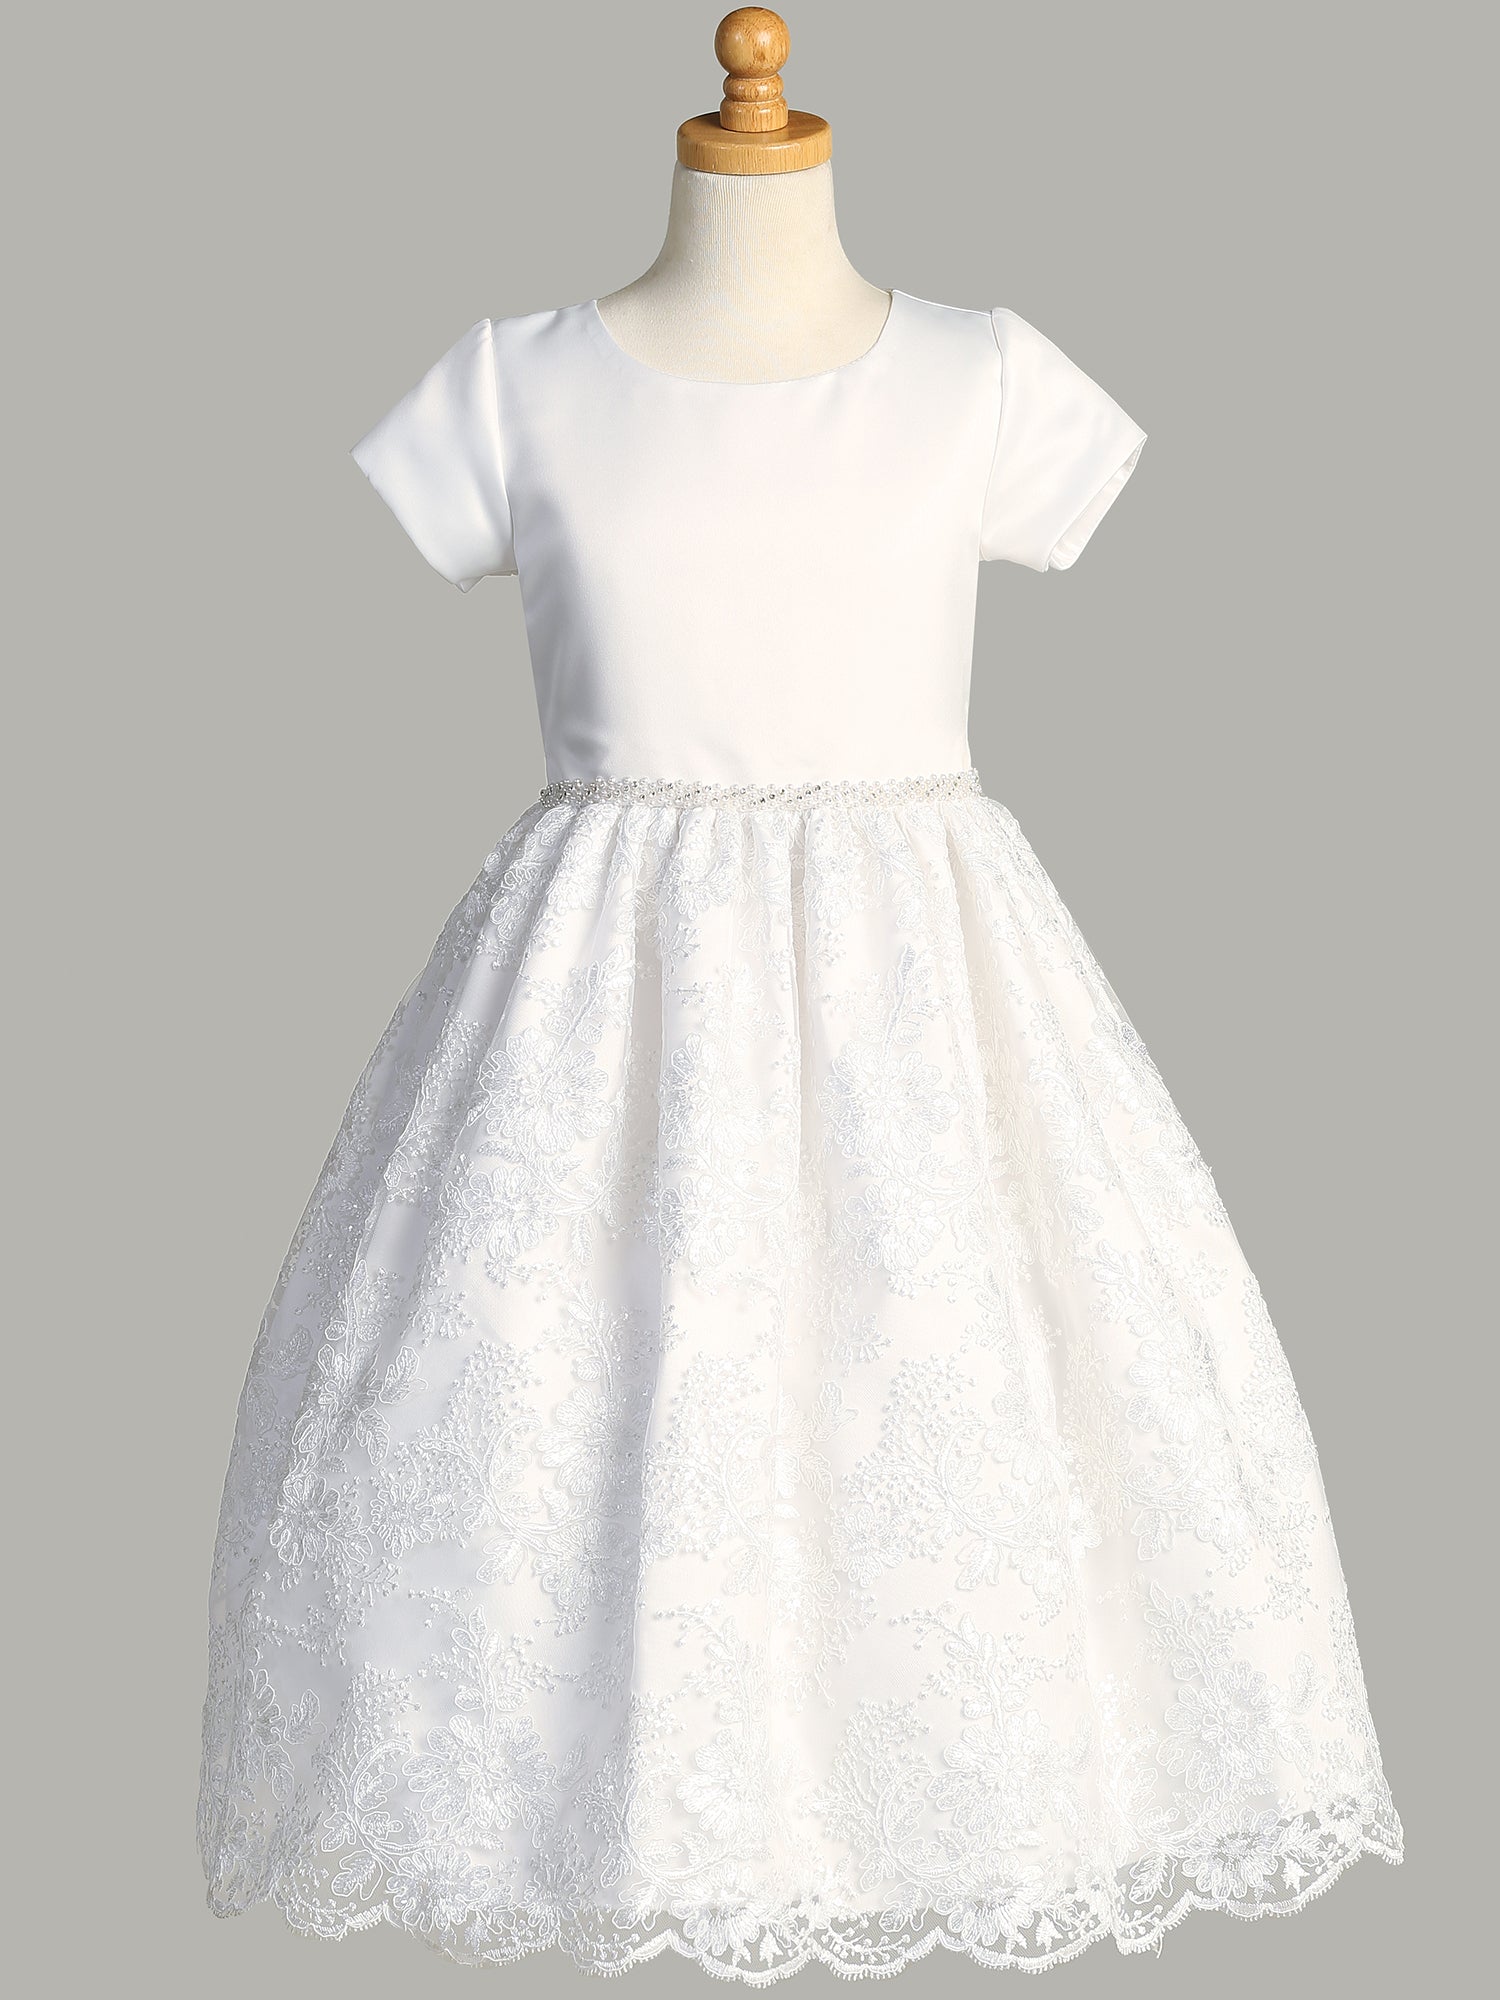 A side view of the First Communion Dress showing the short sleeves and the tea-length of the dress.